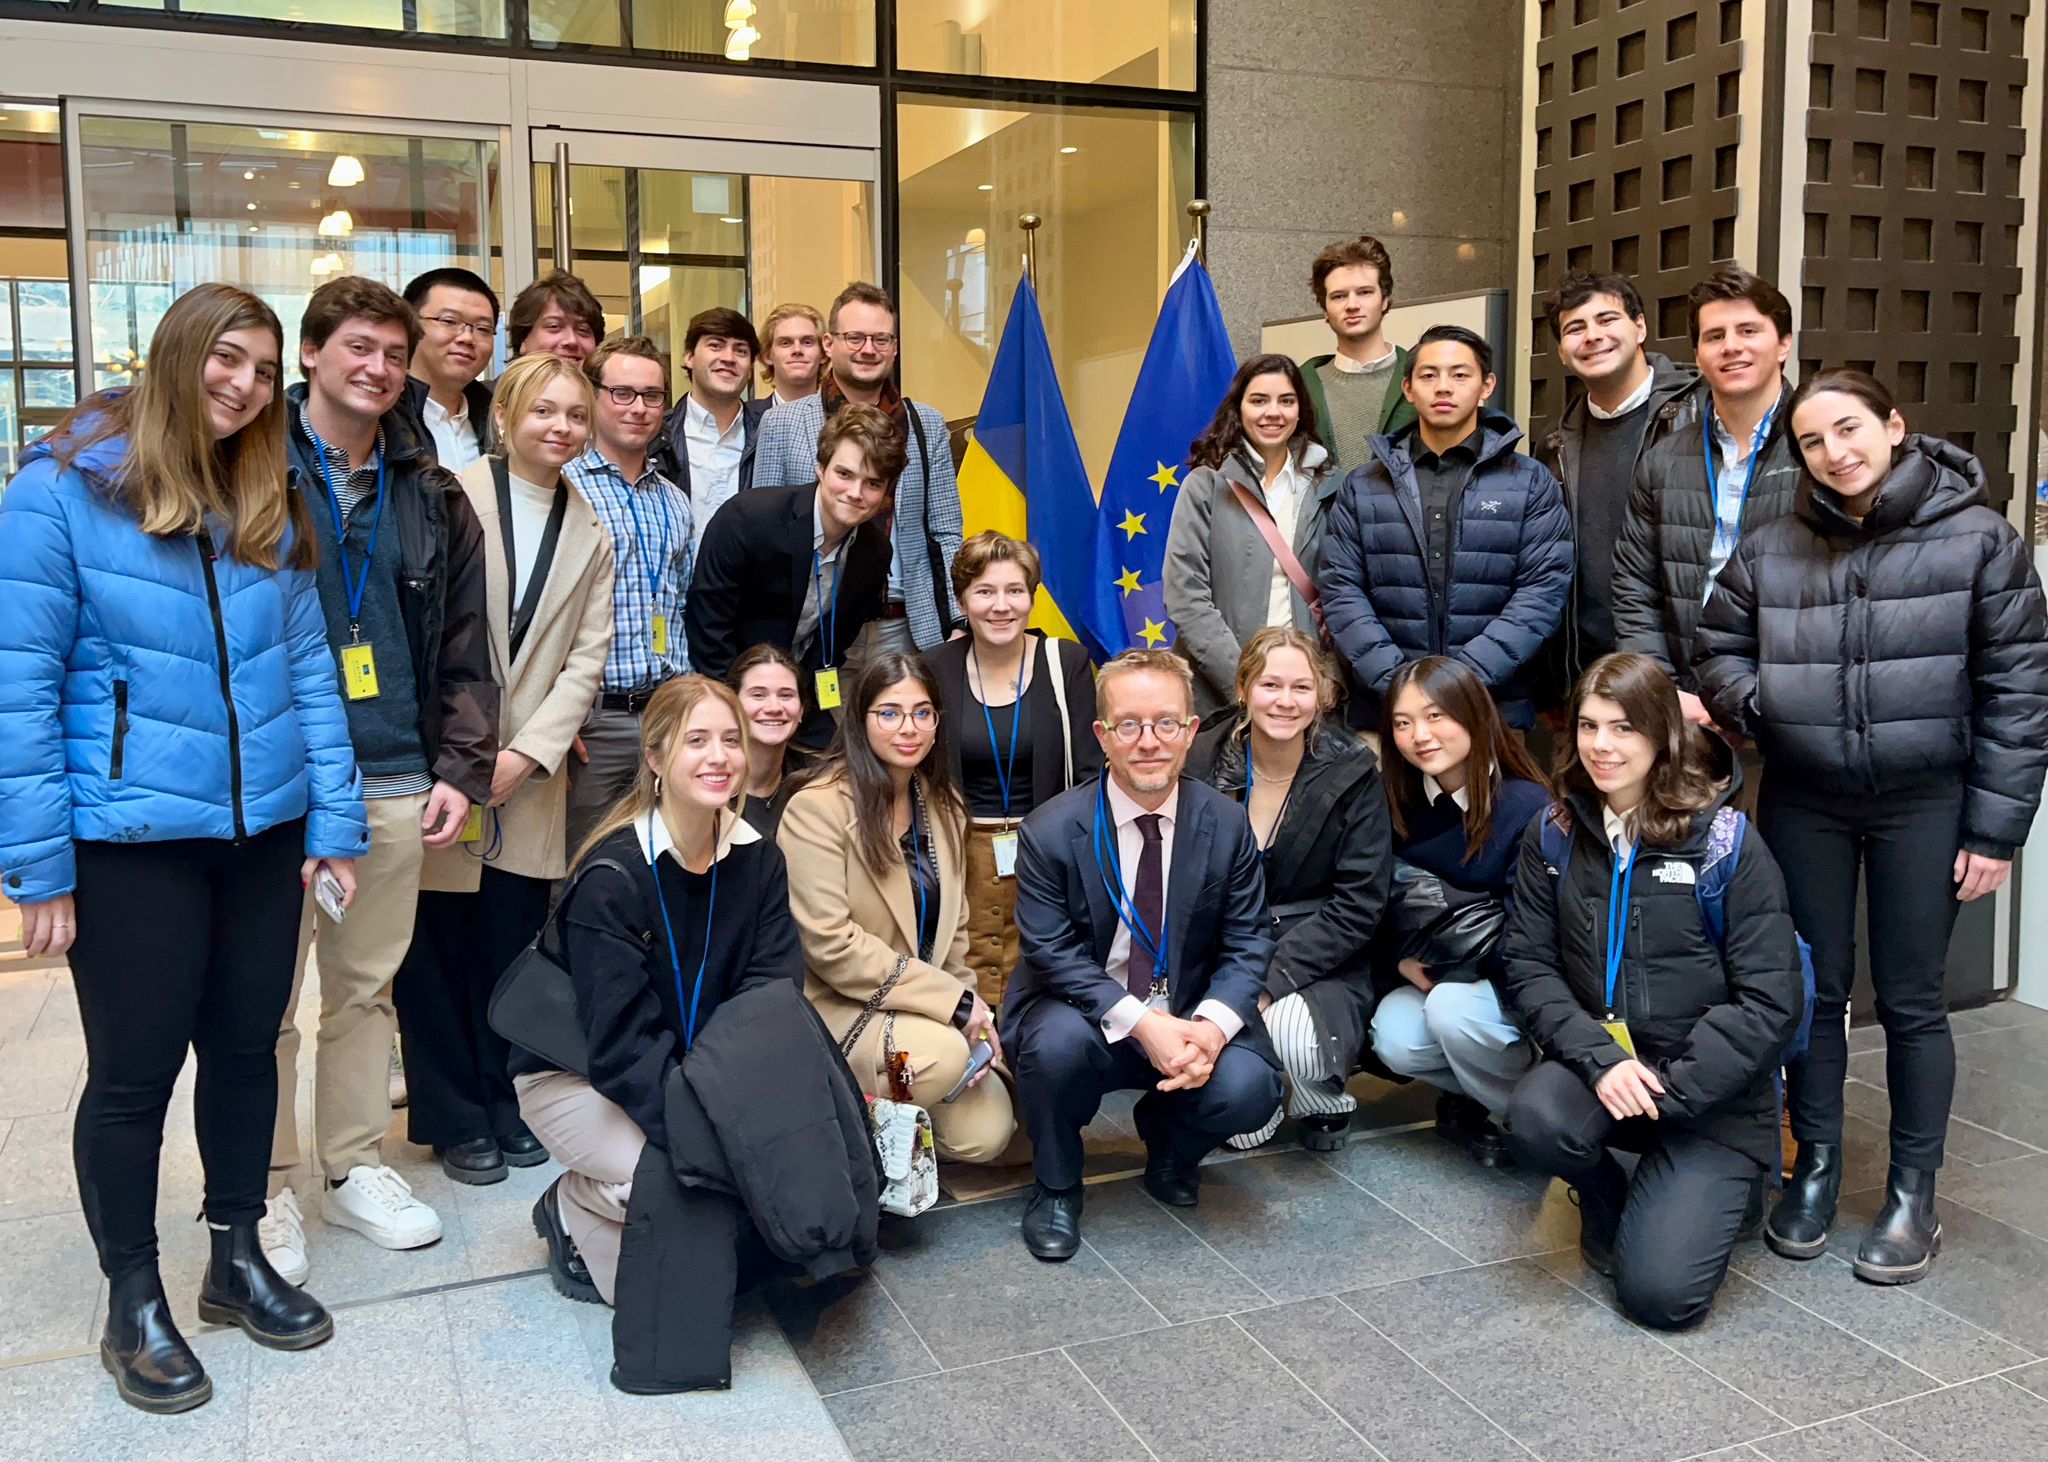 Group of students standing and kneeling. EEAS and Ukraine flag behind group.